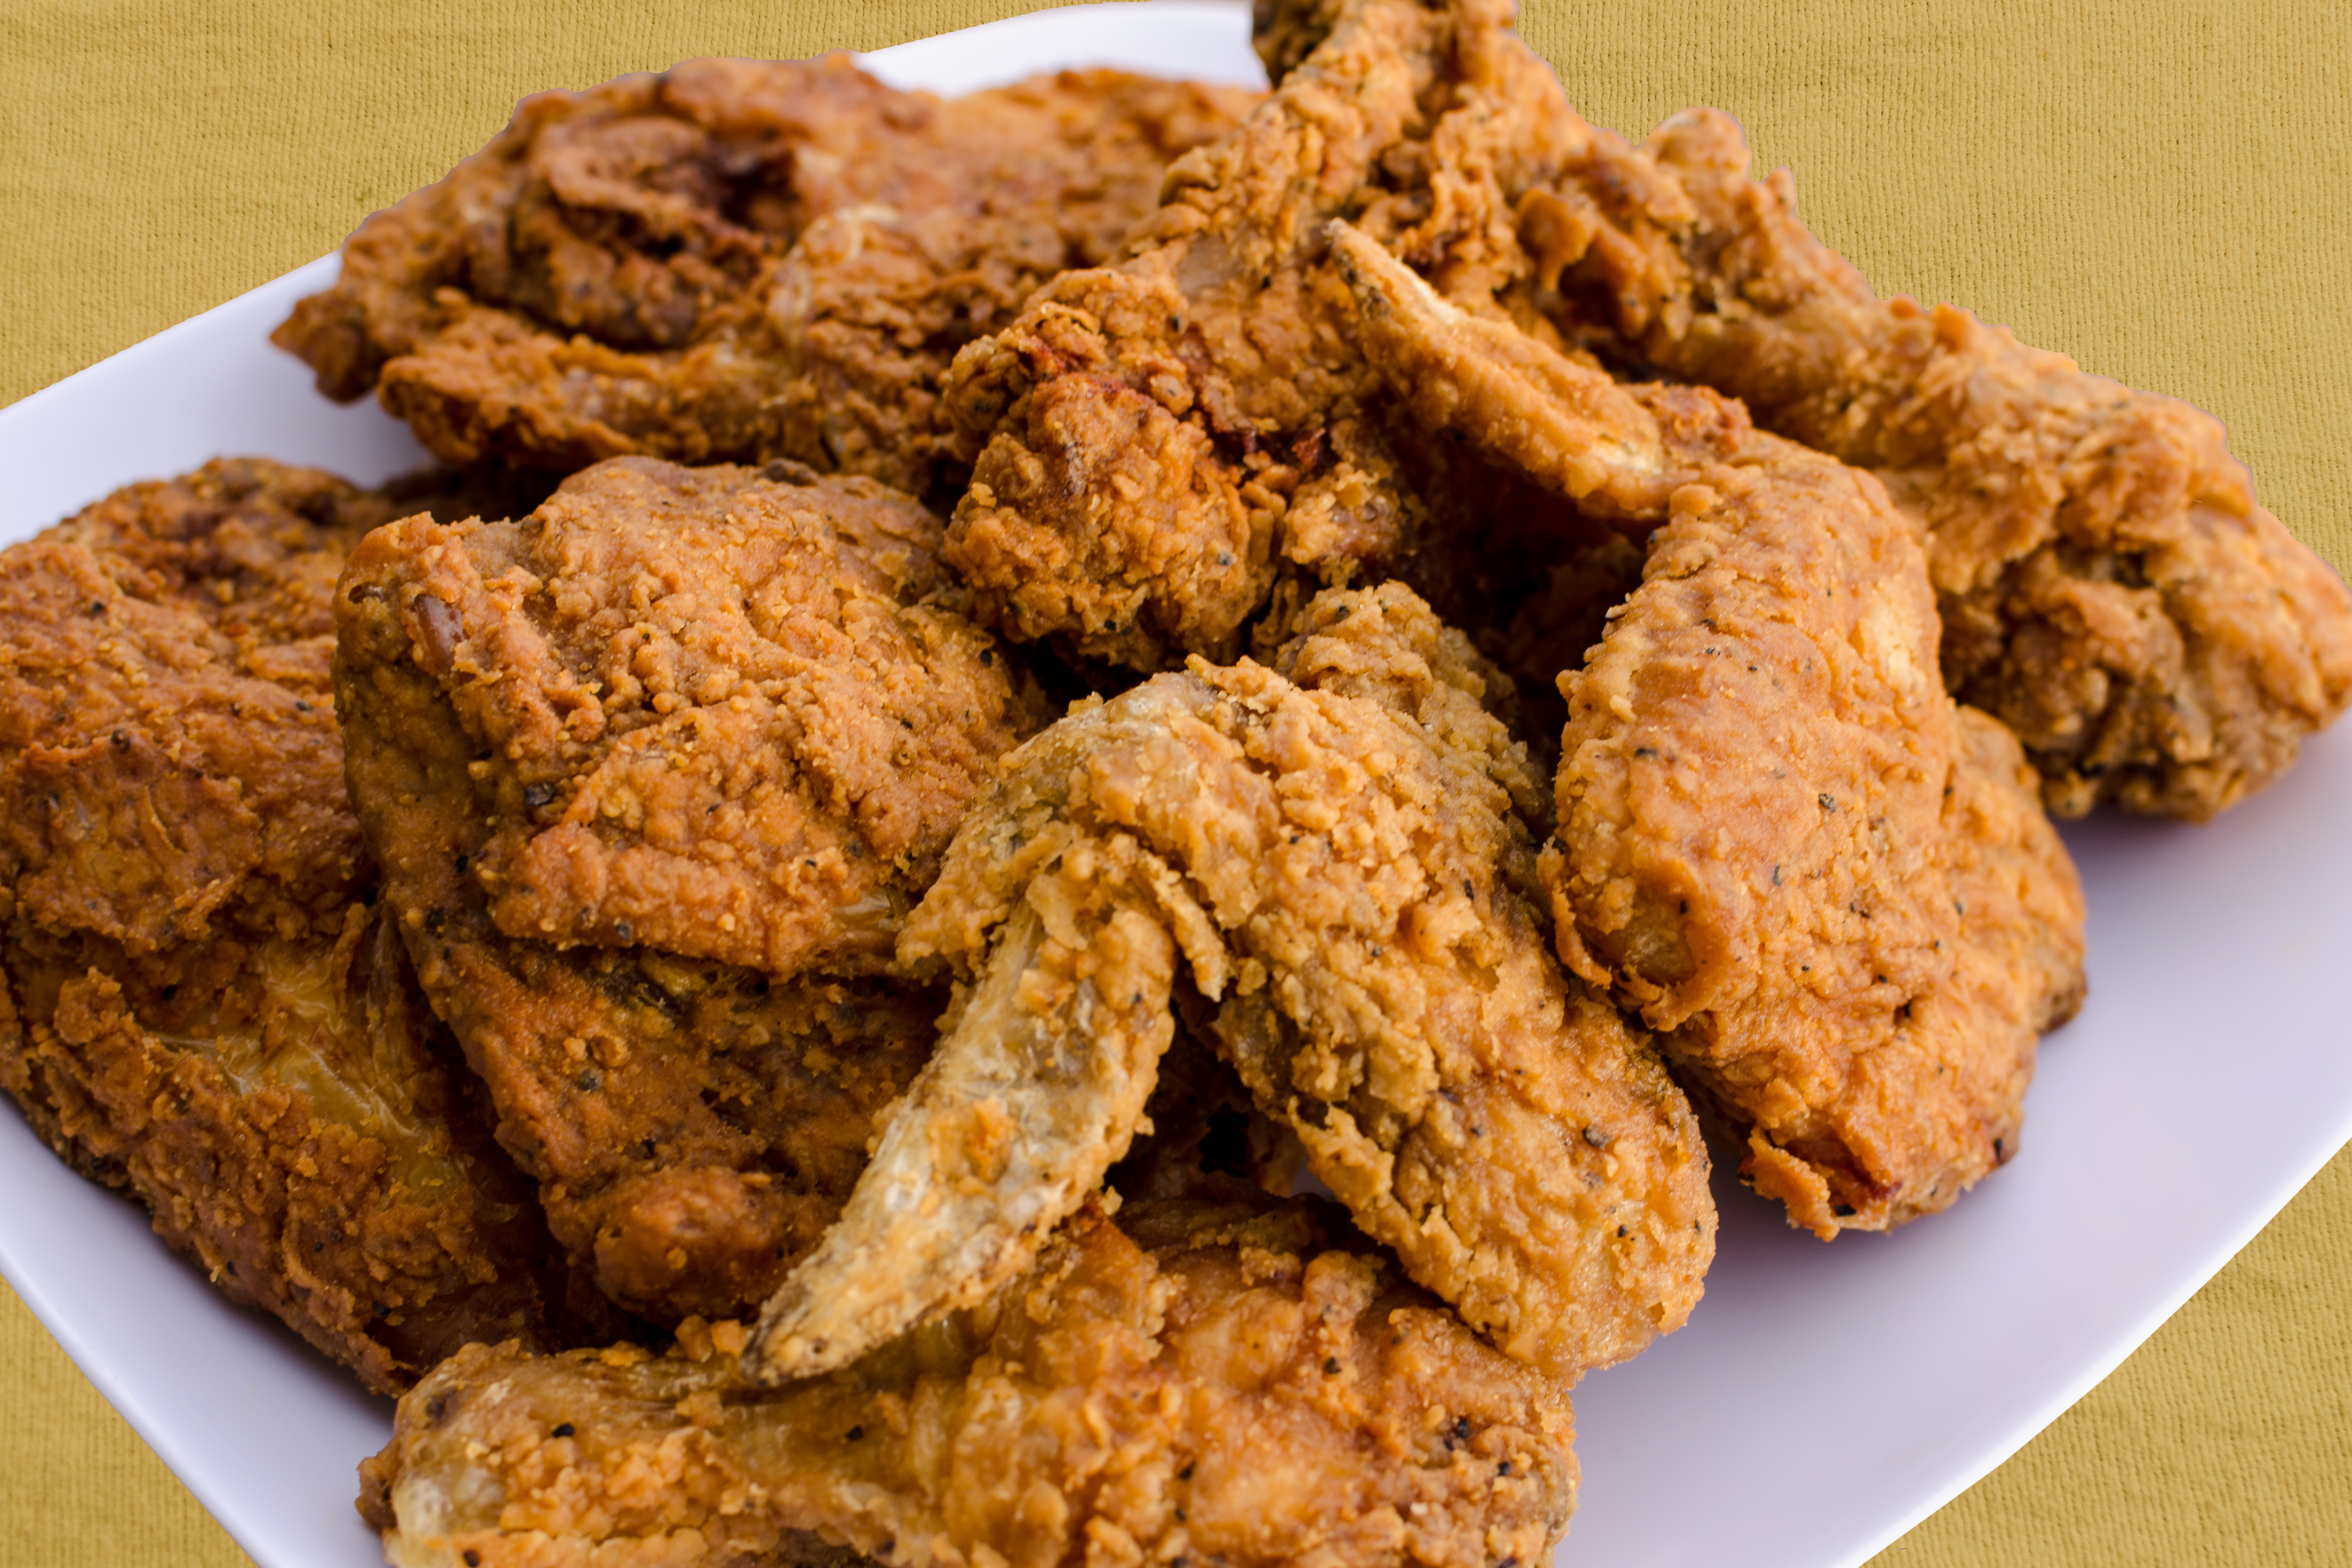 Fried Chicken Wallpaper Image Photos Pictures Background